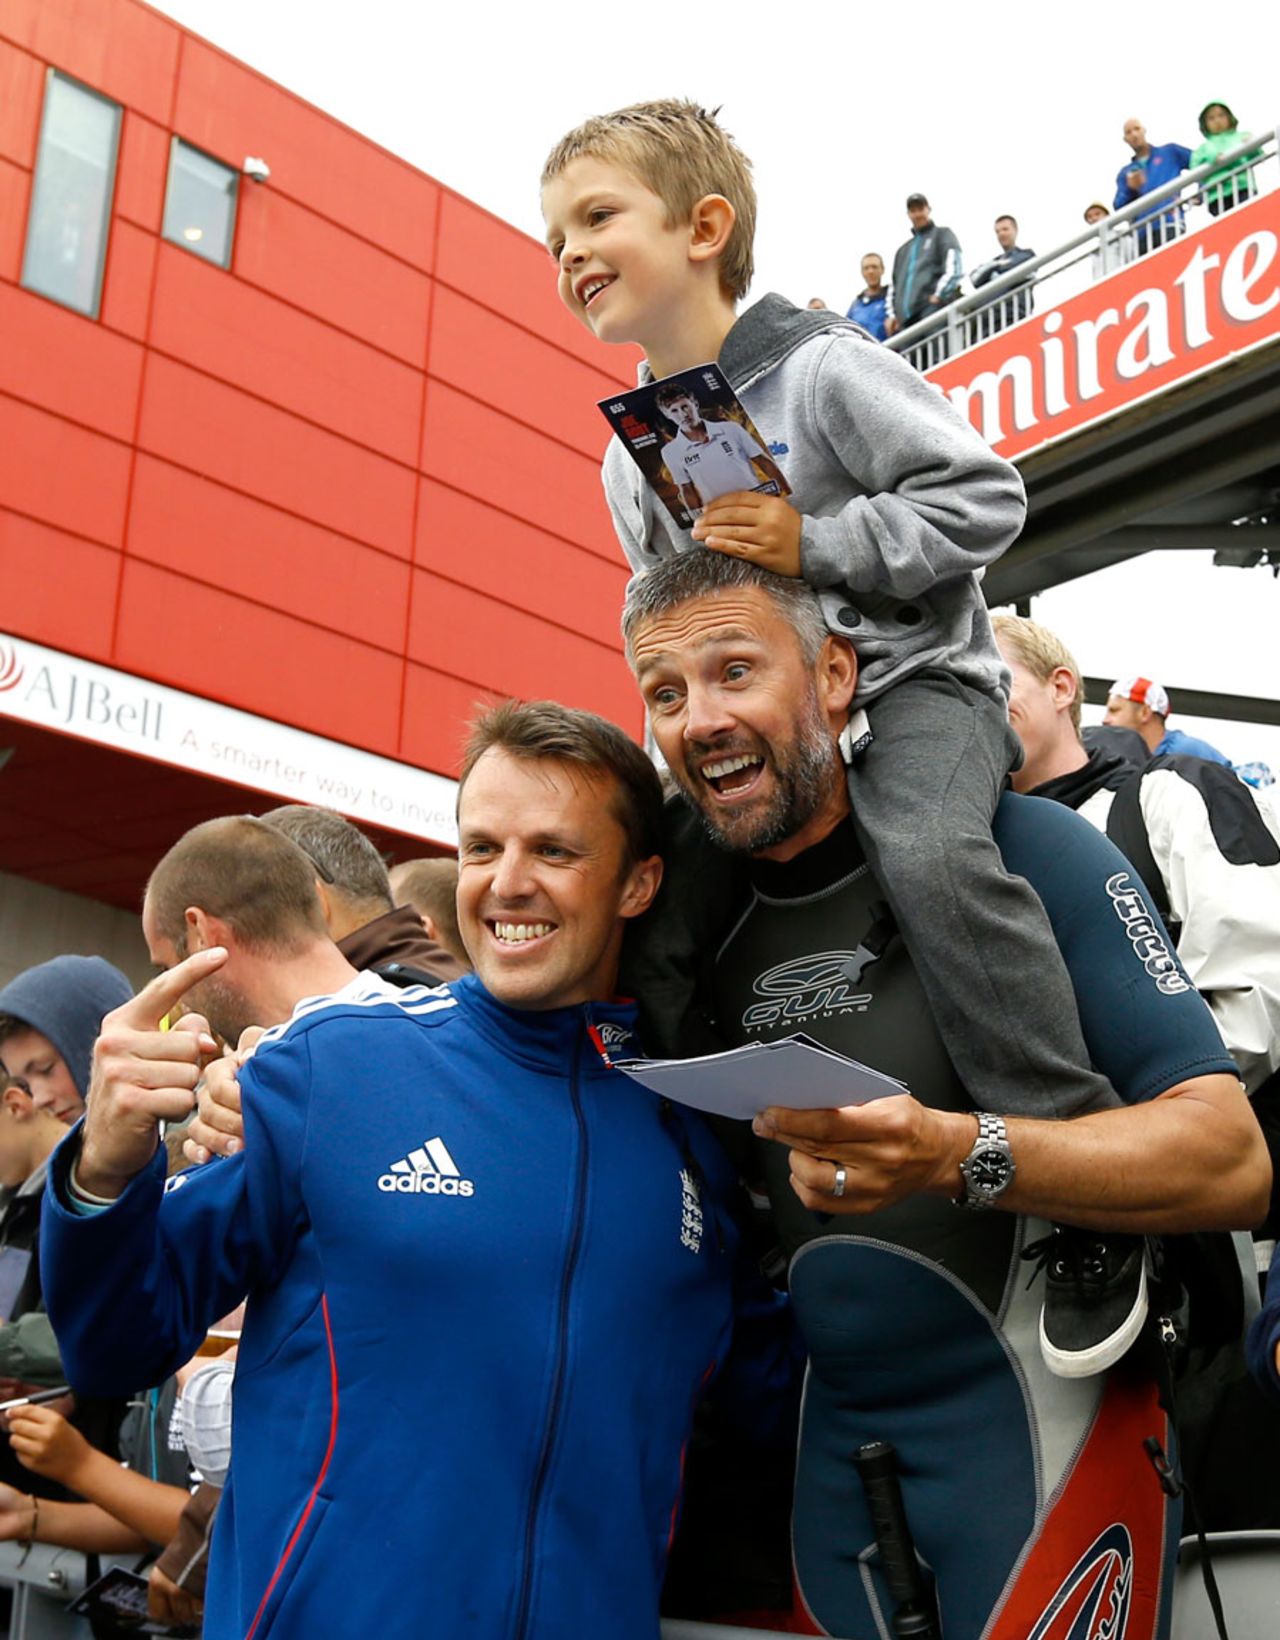 Graeme Swann poses with some fans, England v Australia, 3rd Investec Test, Old Trafford, 5th day, August 5, 2013